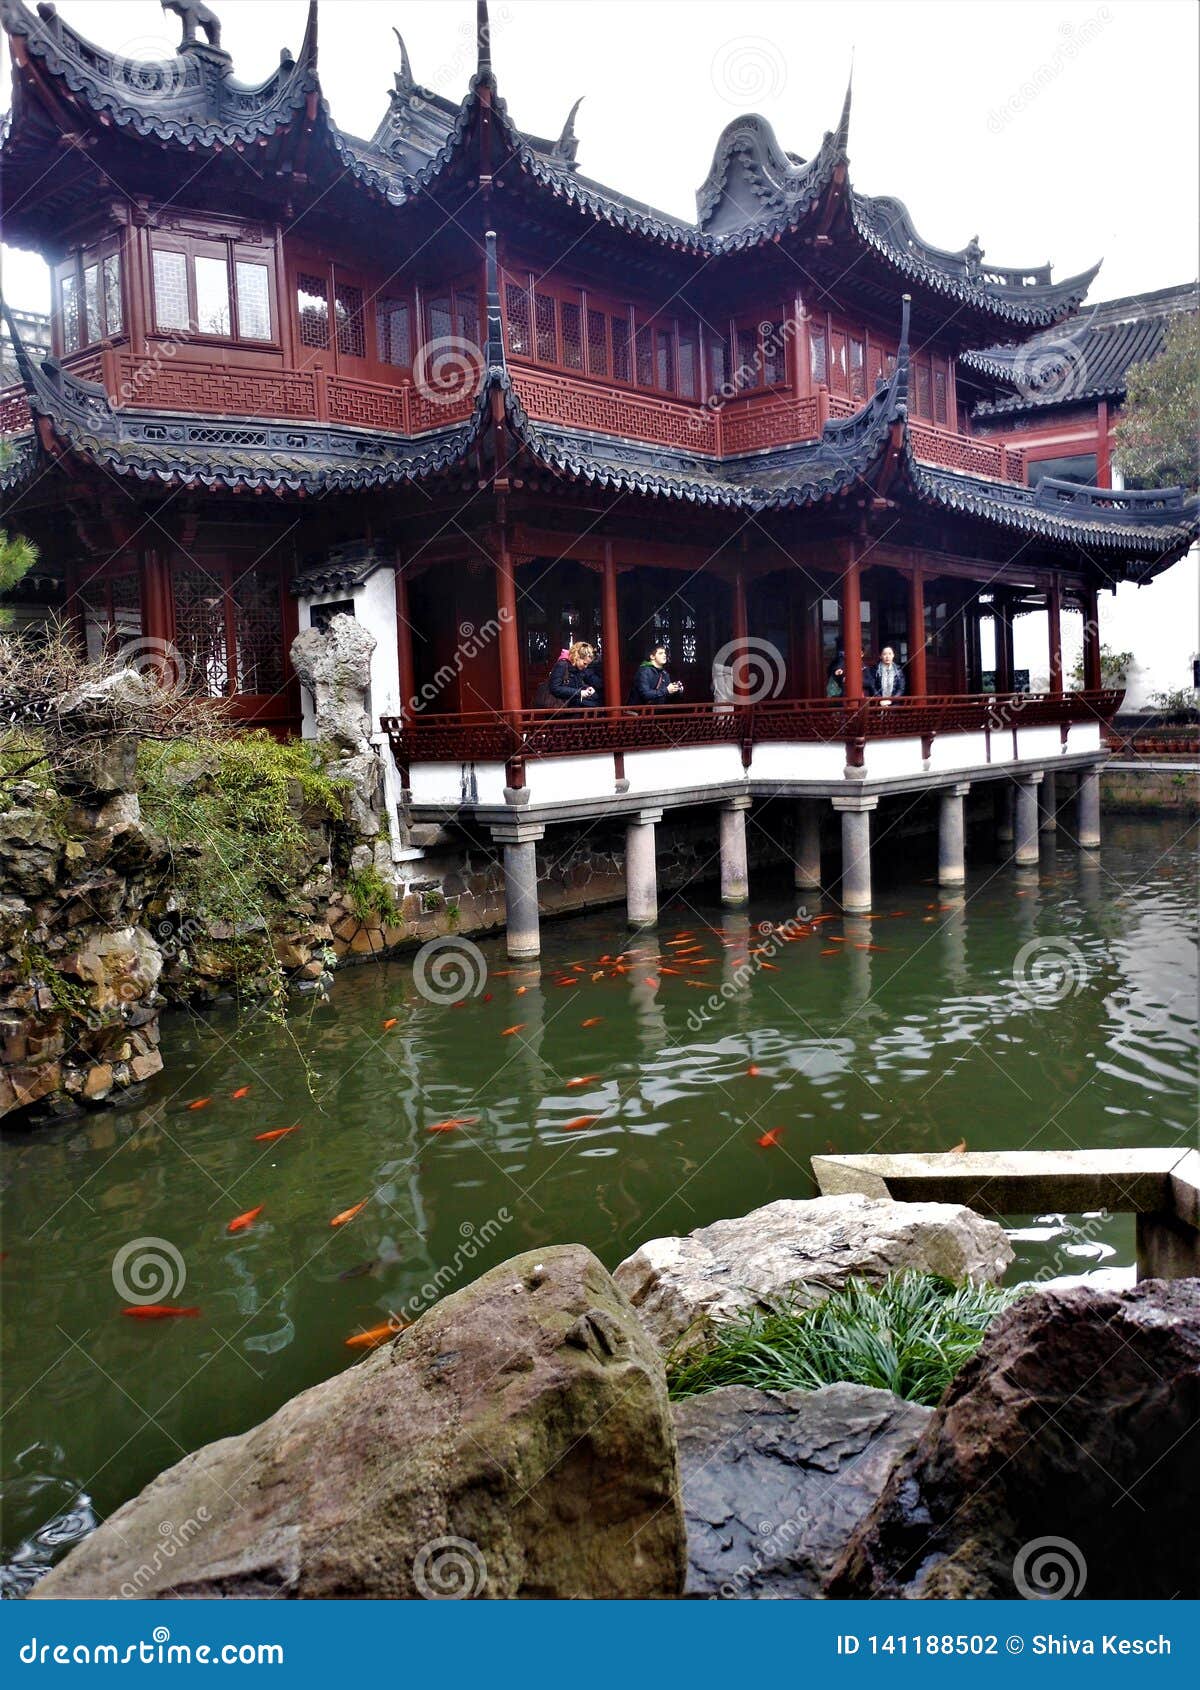 Traditional Chinese Buildings, Lake and Fishes in Shanghai City. Nature and Editorial Photography - Image design, charm: 141188502